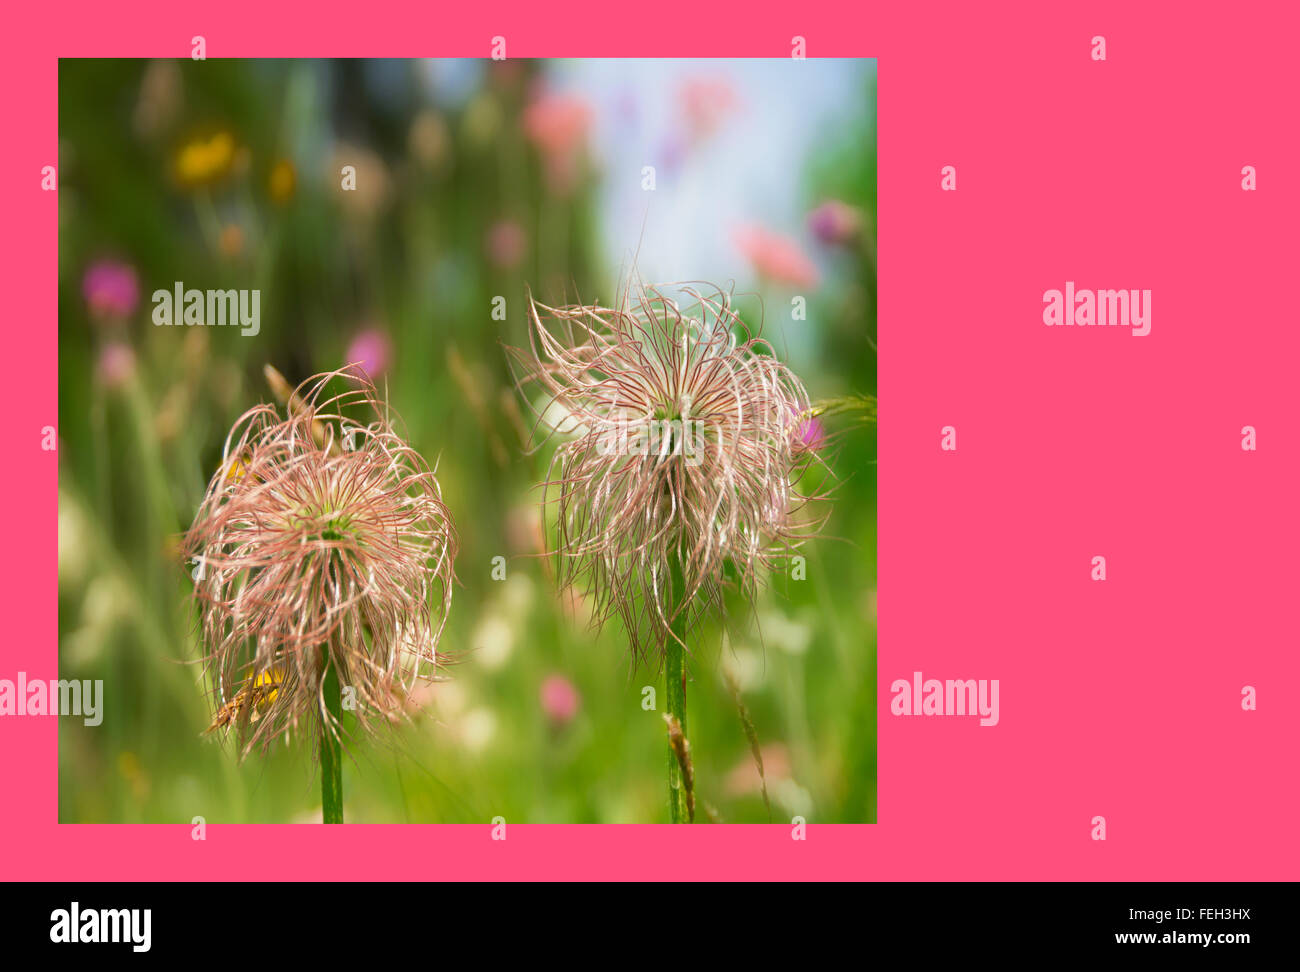 Simply holidays and anniversary greeting card with rare wild flowers Stock Photo